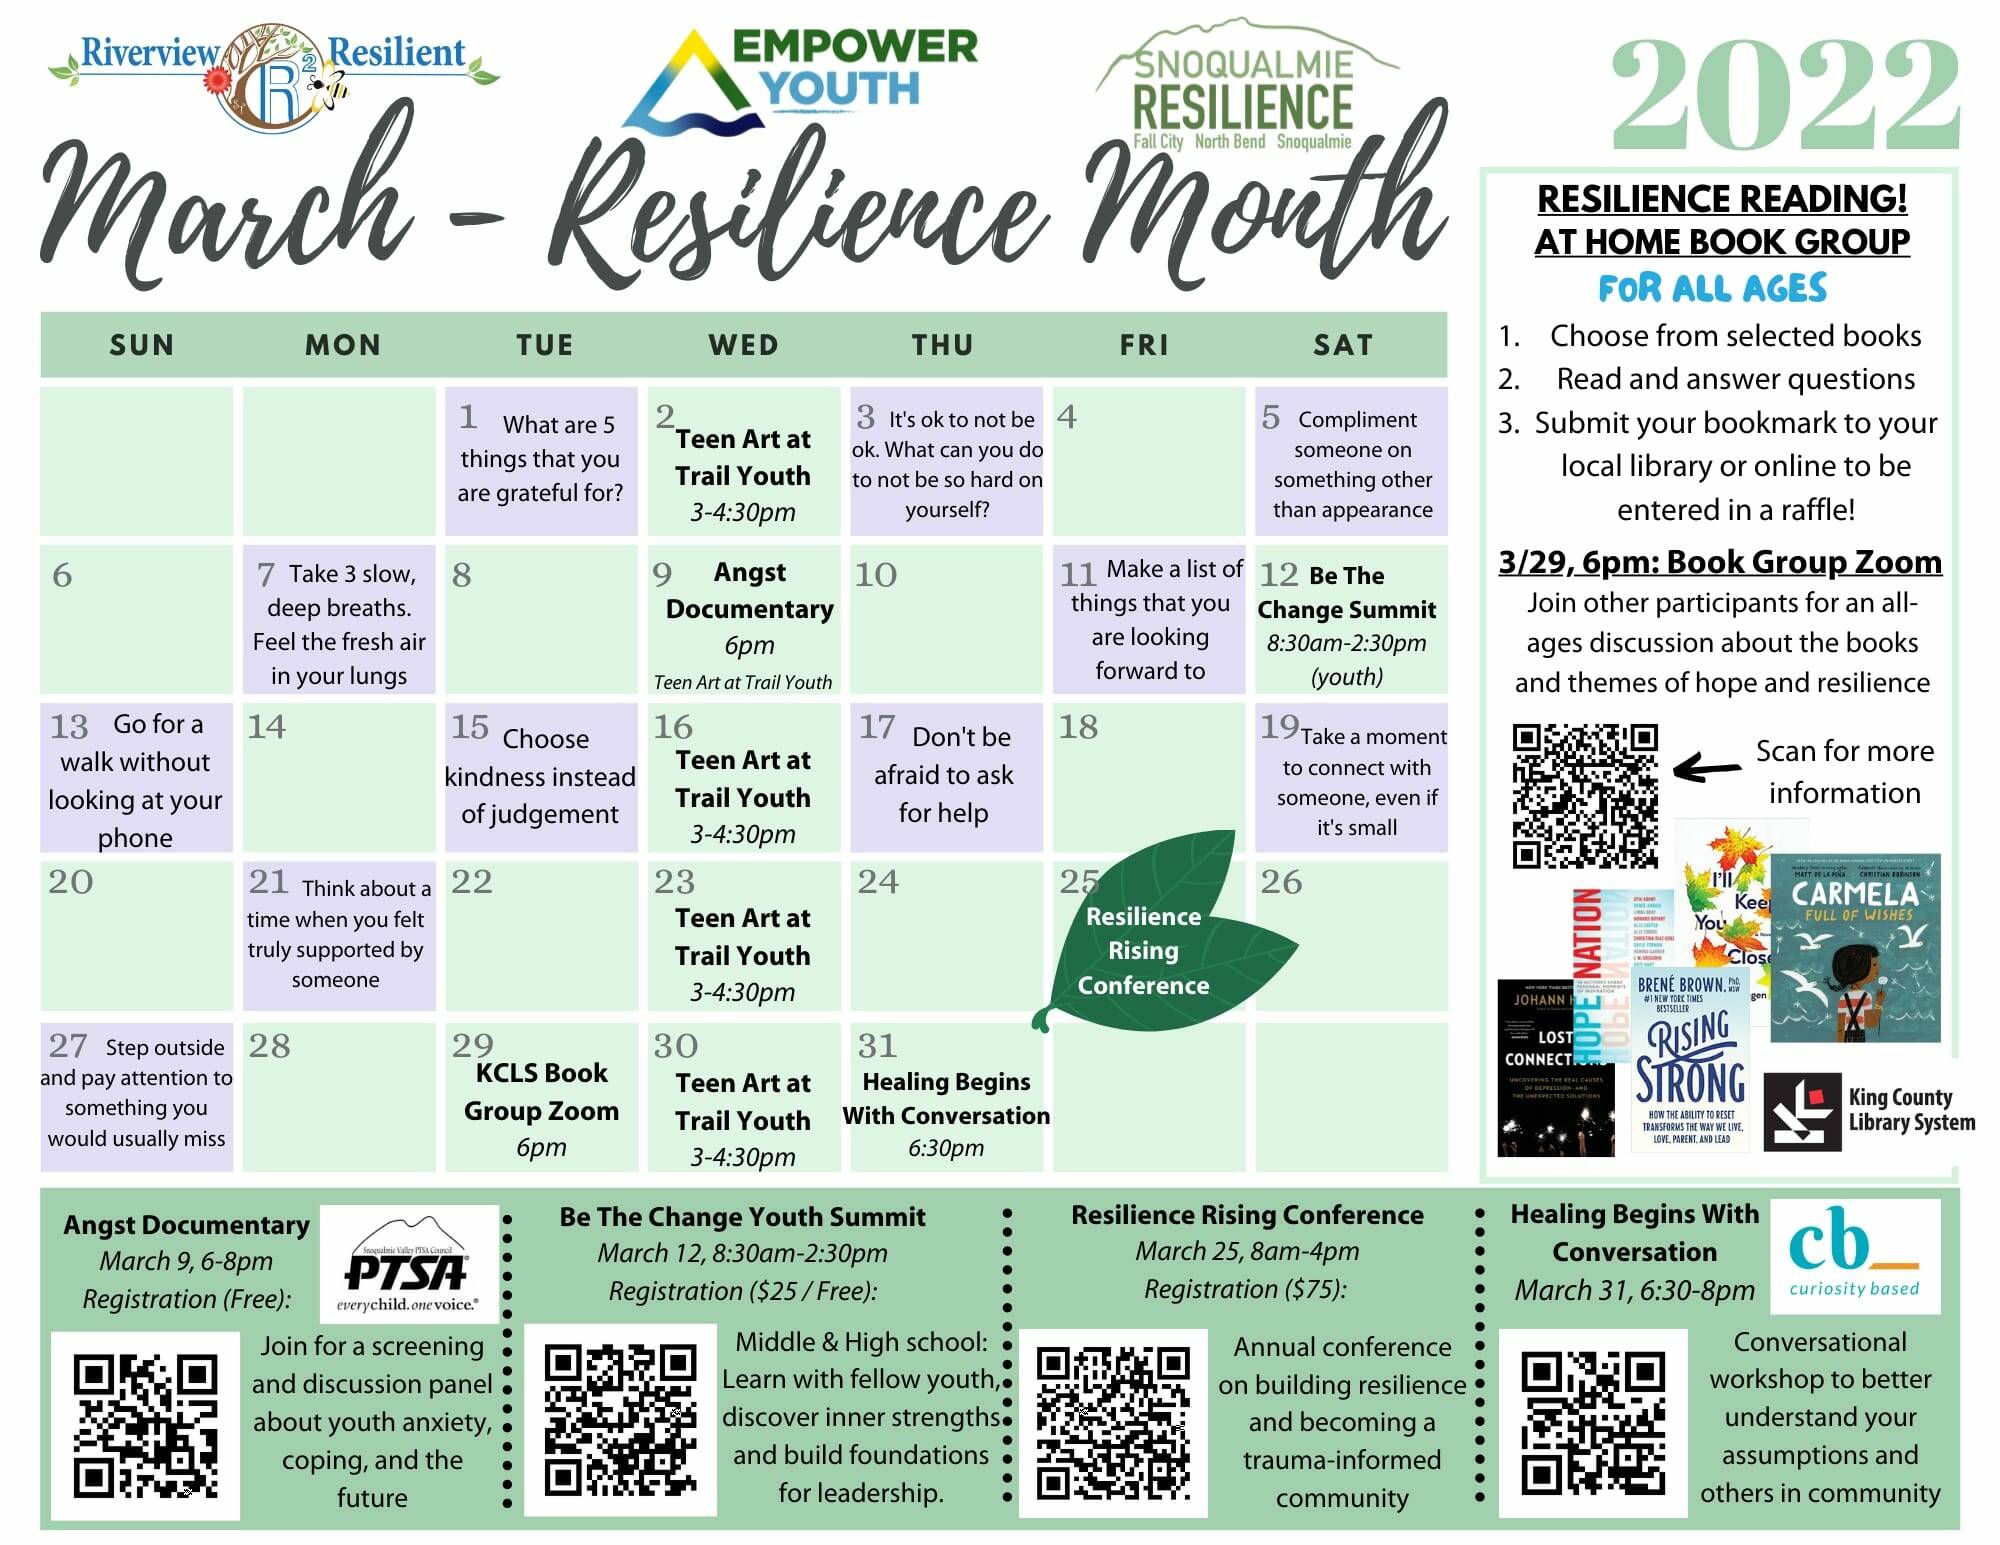 Resilience Month calendar for the Empower Youth Network. Courtesy photo.